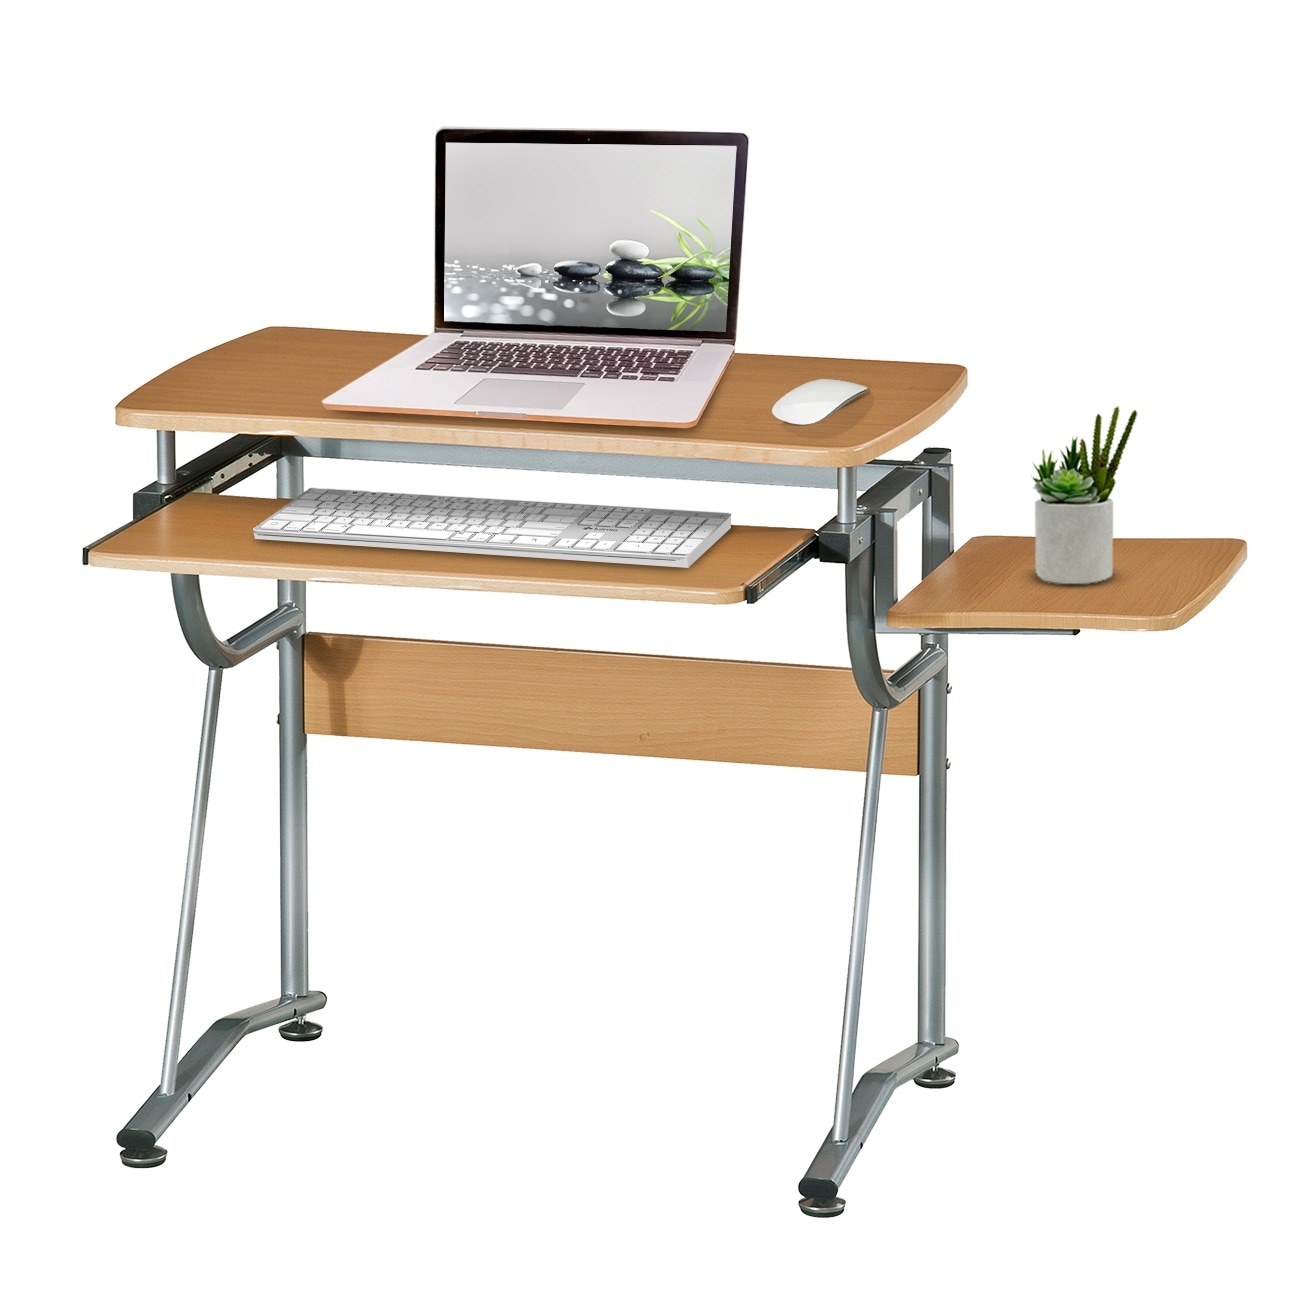 https://ak1.ostkcdn.com/images/products/is/images/direct/e693e0a0374719cfe0056e1b03ddfc2f641eba5e/Techni-Mobili-Compact-Computer-Desk-with-Side-Shelf-and-Keyboard-Panel.jpg